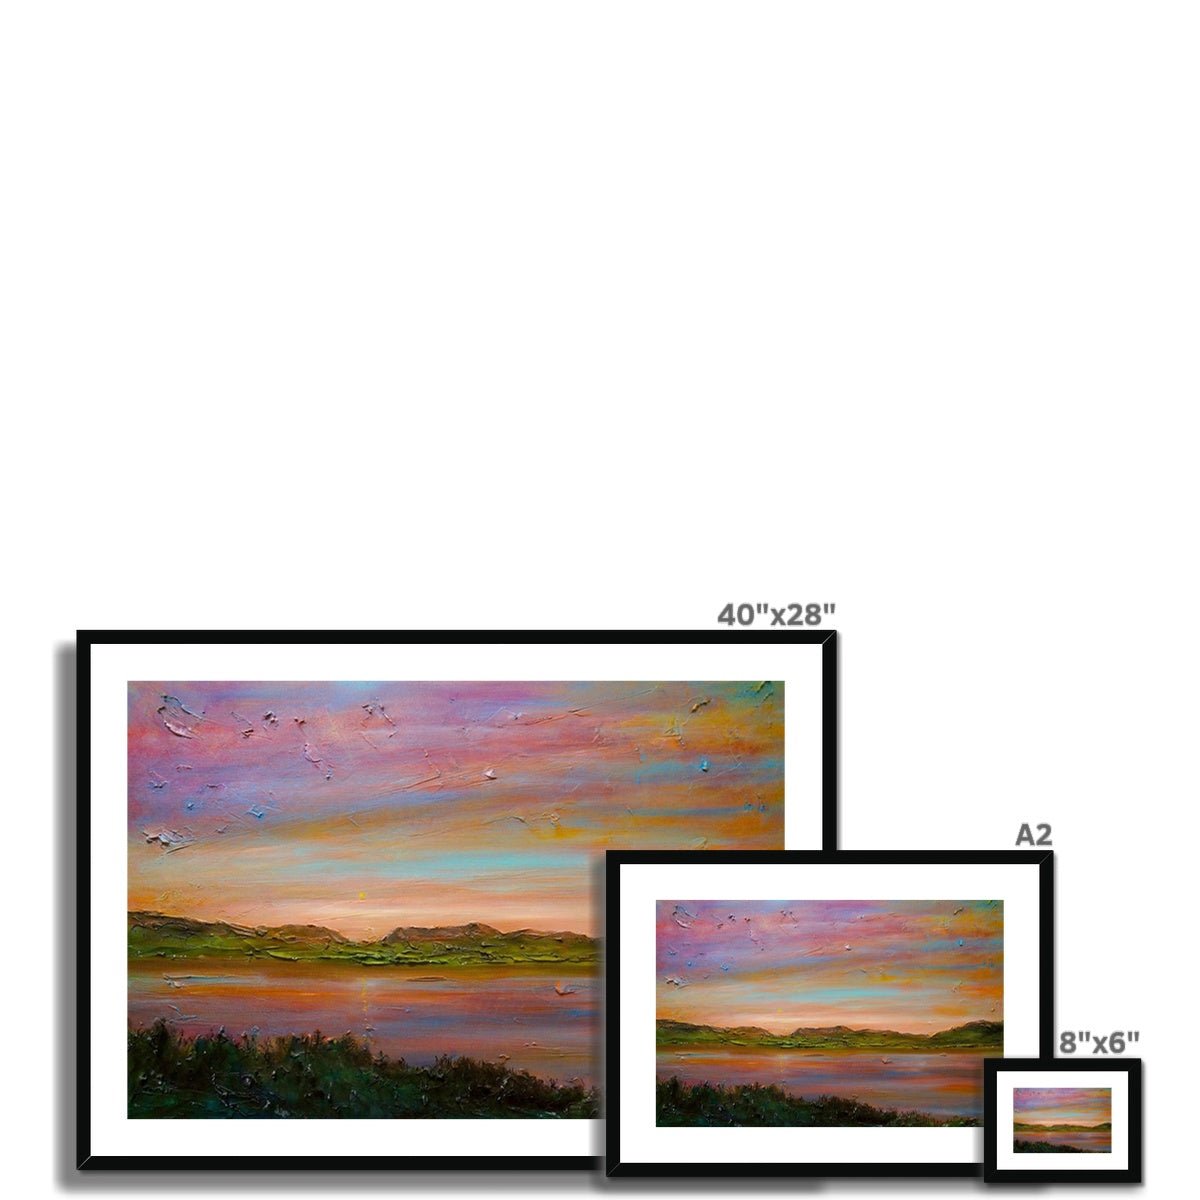 Gourock Golf Club Sunset Painting | Framed & Mounted Prints From Scotland-Framed & Mounted Prints-River Clyde Art Gallery-Paintings, Prints, Homeware, Art Gifts From Scotland By Scottish Artist Kevin Hunter